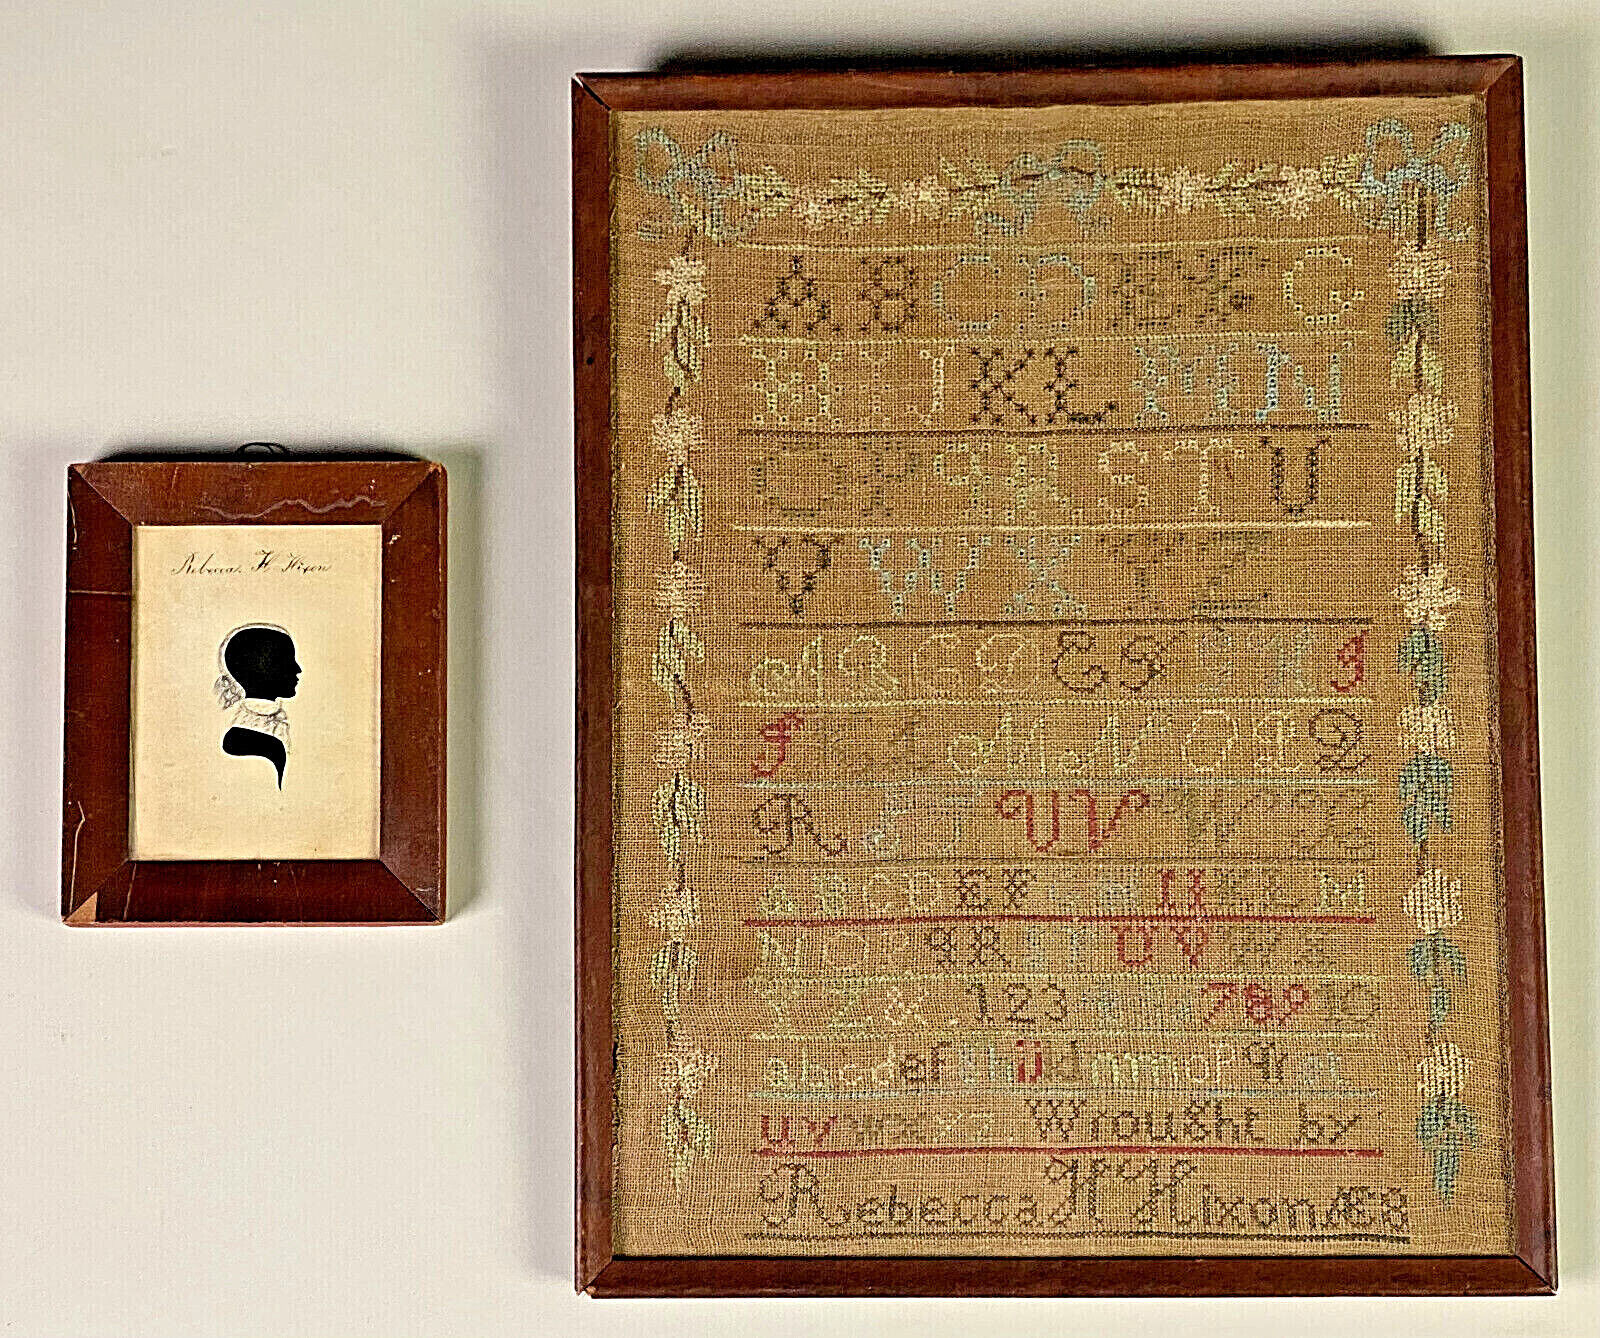 Early Sampler By Rebecca Hixon With Rare Silhouette Cut By James Hosley Whitcomb